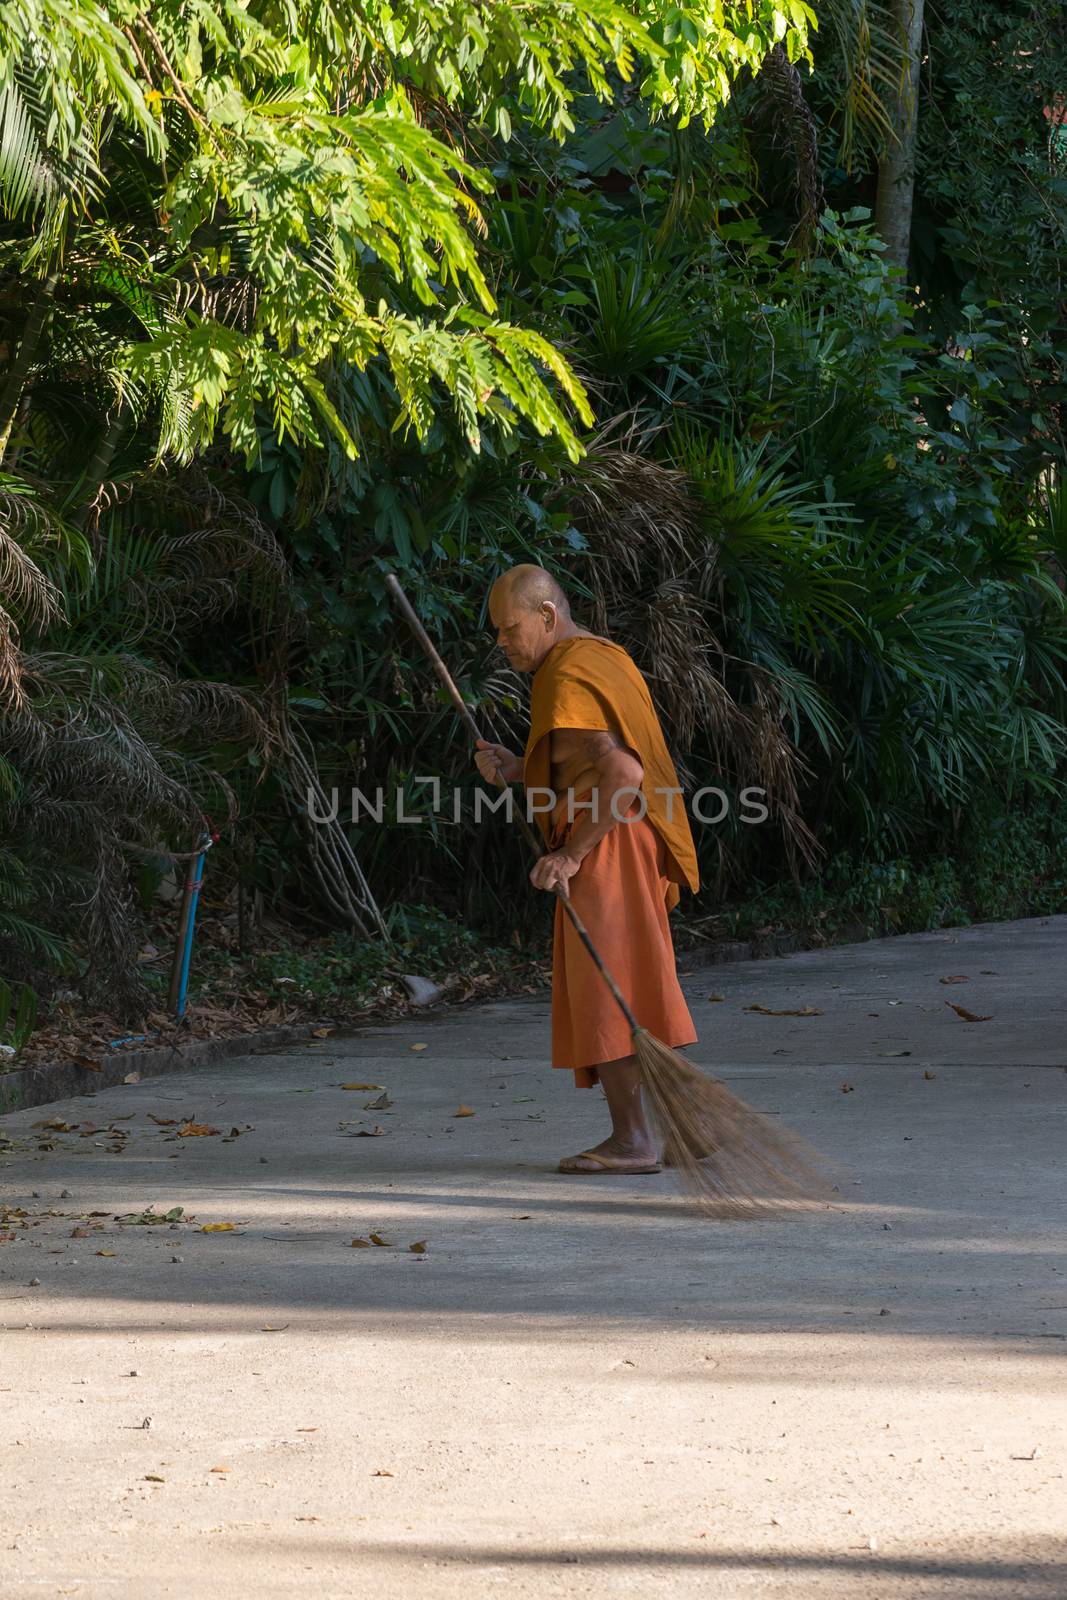 Chanthaburi, Thailand - February 1, 2016 : Thai monk sweeping a temple floor for clean at Thai forest temple (Wat Pa) in the Na Yai Am District of Chanthaburi, Thailand.